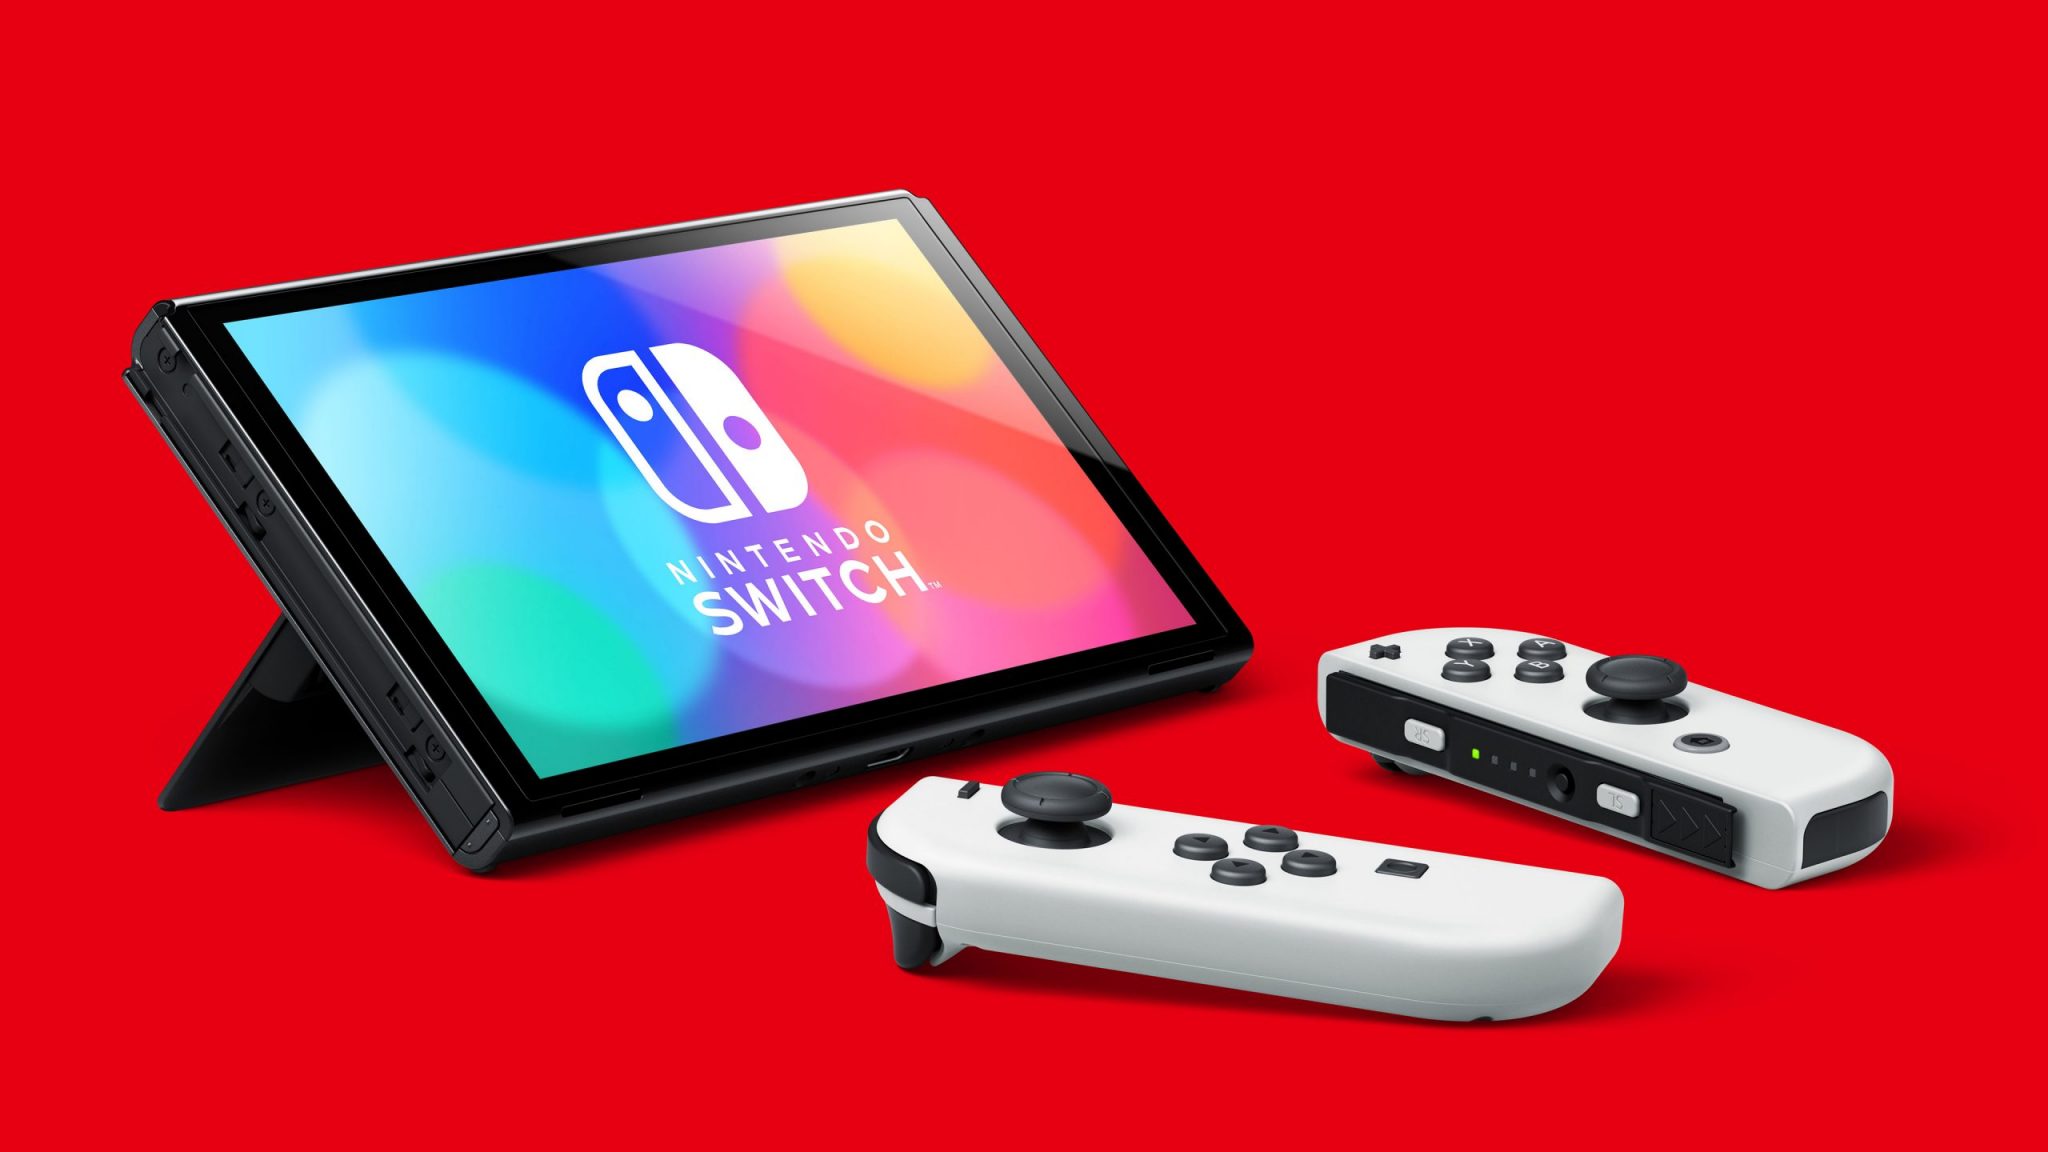 nintendo switch oled release date